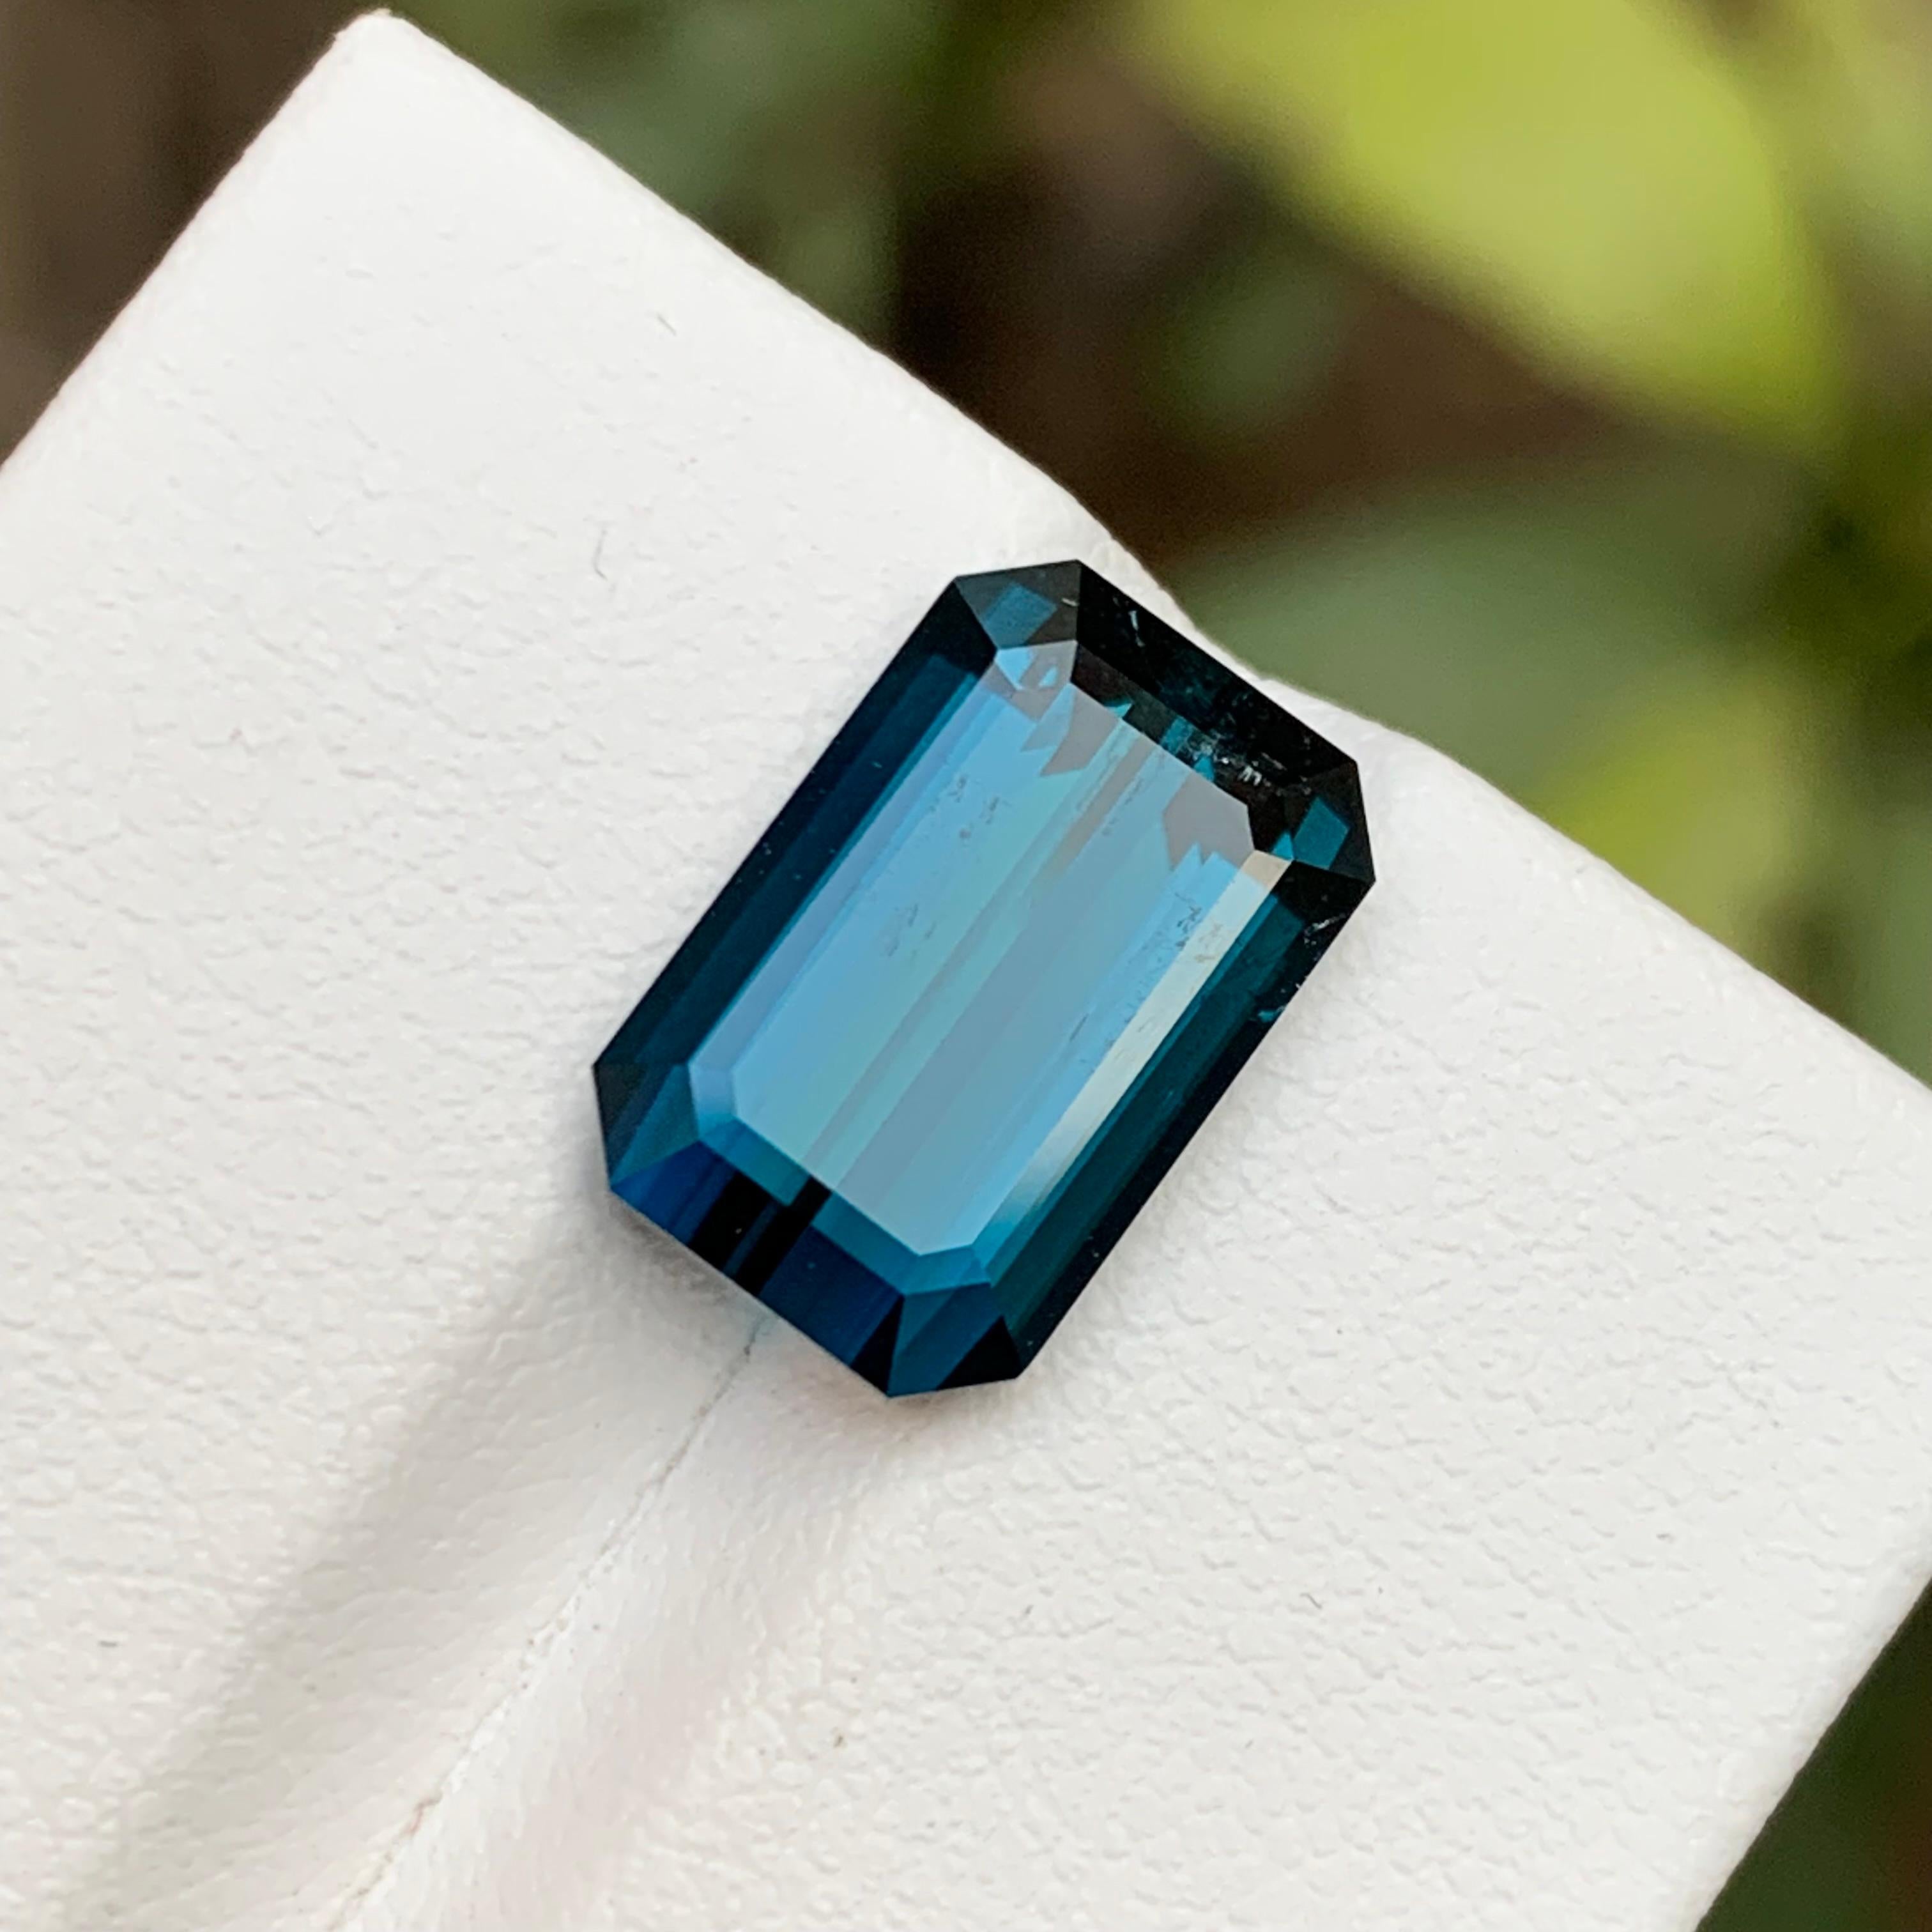 A Star of the Night Sky: 6.15 Carat Deep Inky Blue Afghan Tourmaline

Gemstone Type: Tourmaline
Weight: 6.15 Carats
Dimensions: 12.77 x 8.44 x 6.13 mm
Color: Deep Inky Blue
Clarity: Slightly Included-Approx 90% Clean
Treatment: Untreated 
Origin: